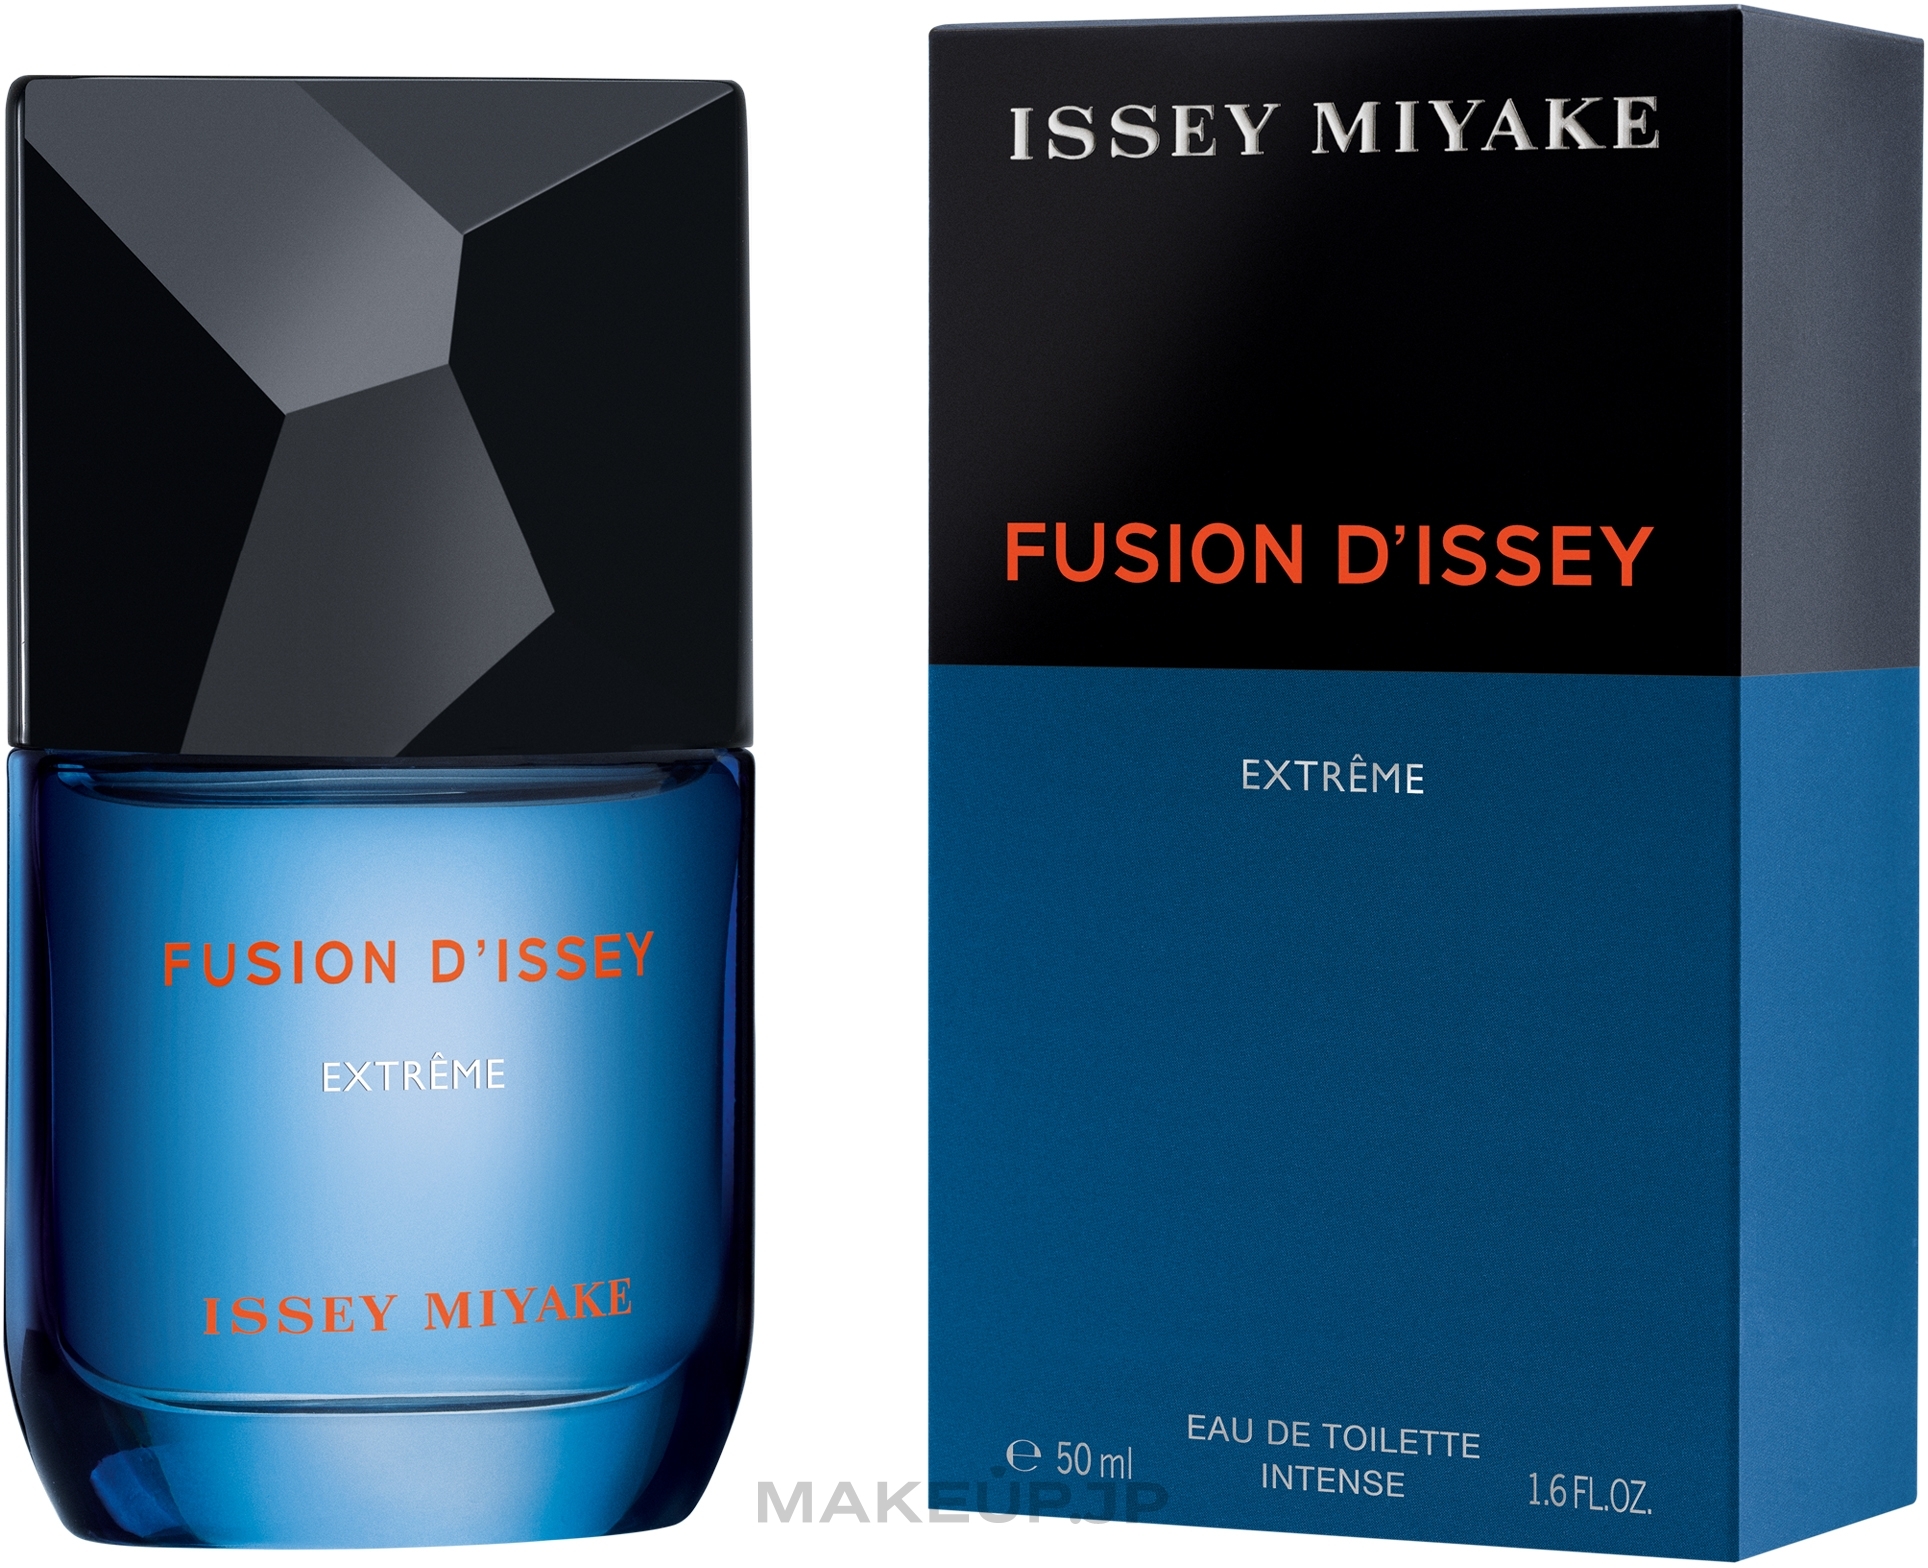 Issey Miyake Fusion D'Issey Extreme - Eau de Toilette — photo 50 ml